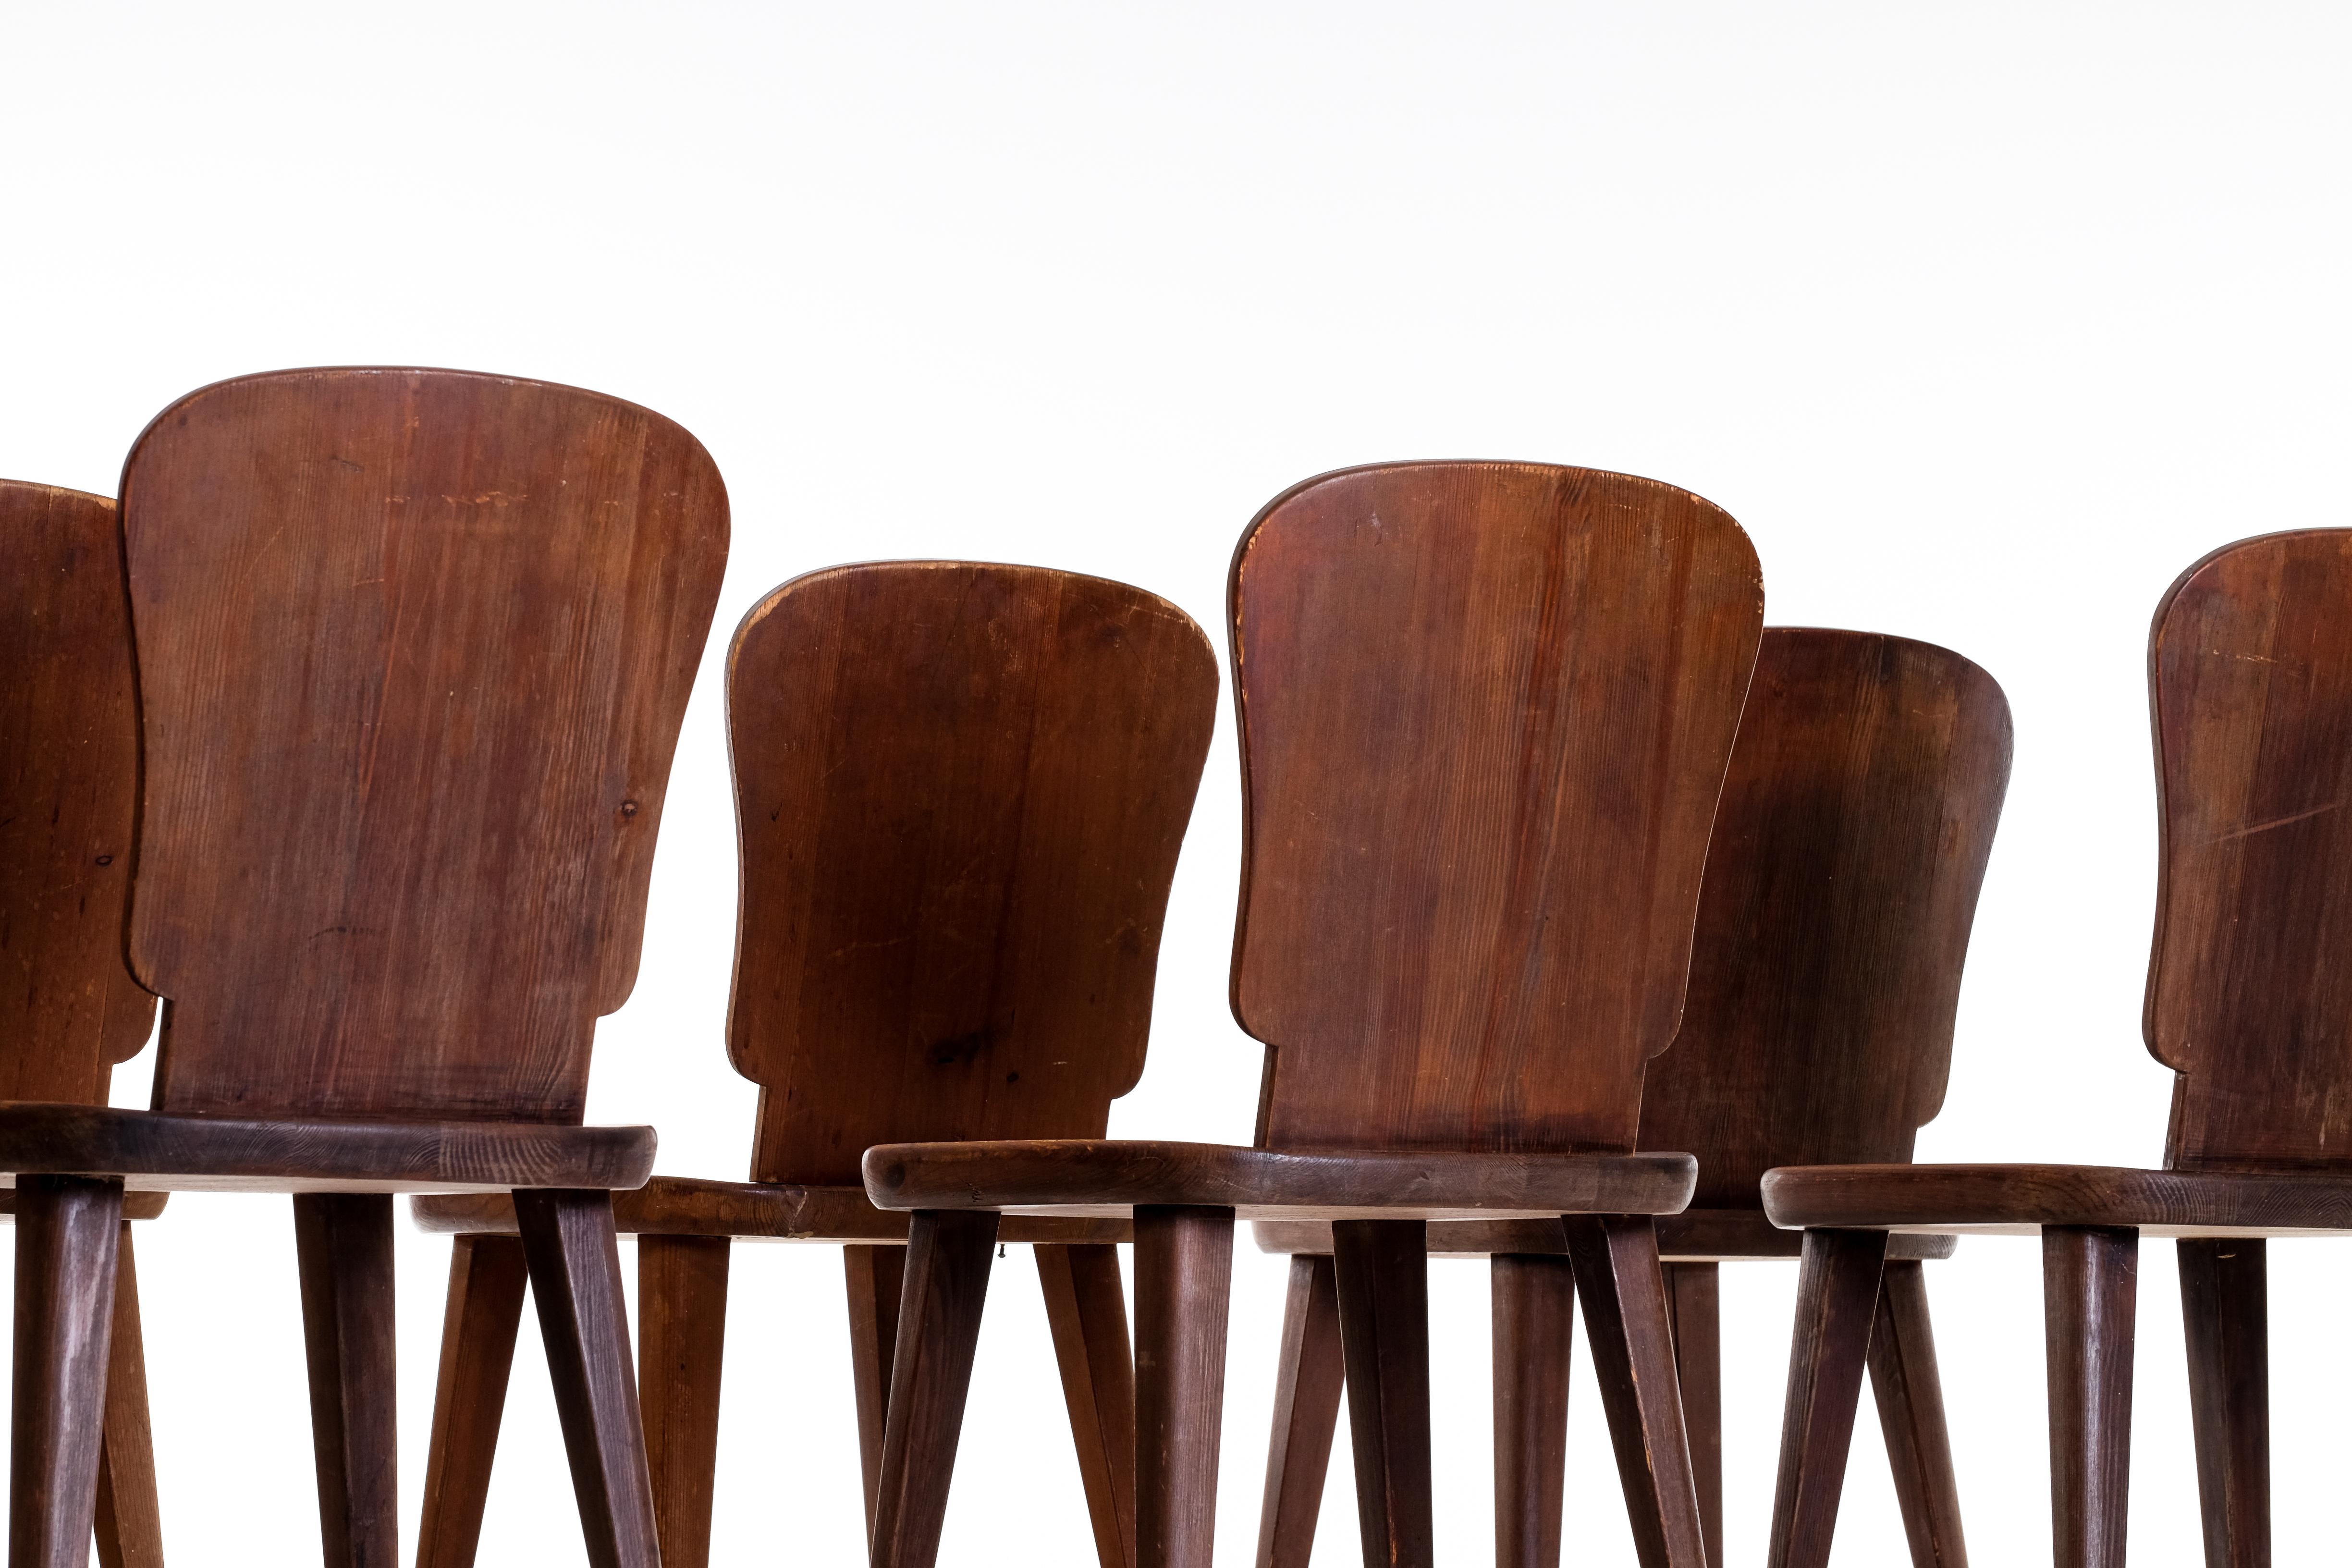 Rare Set of 6 Swedish Pine Chairs, 1940s For Sale 1